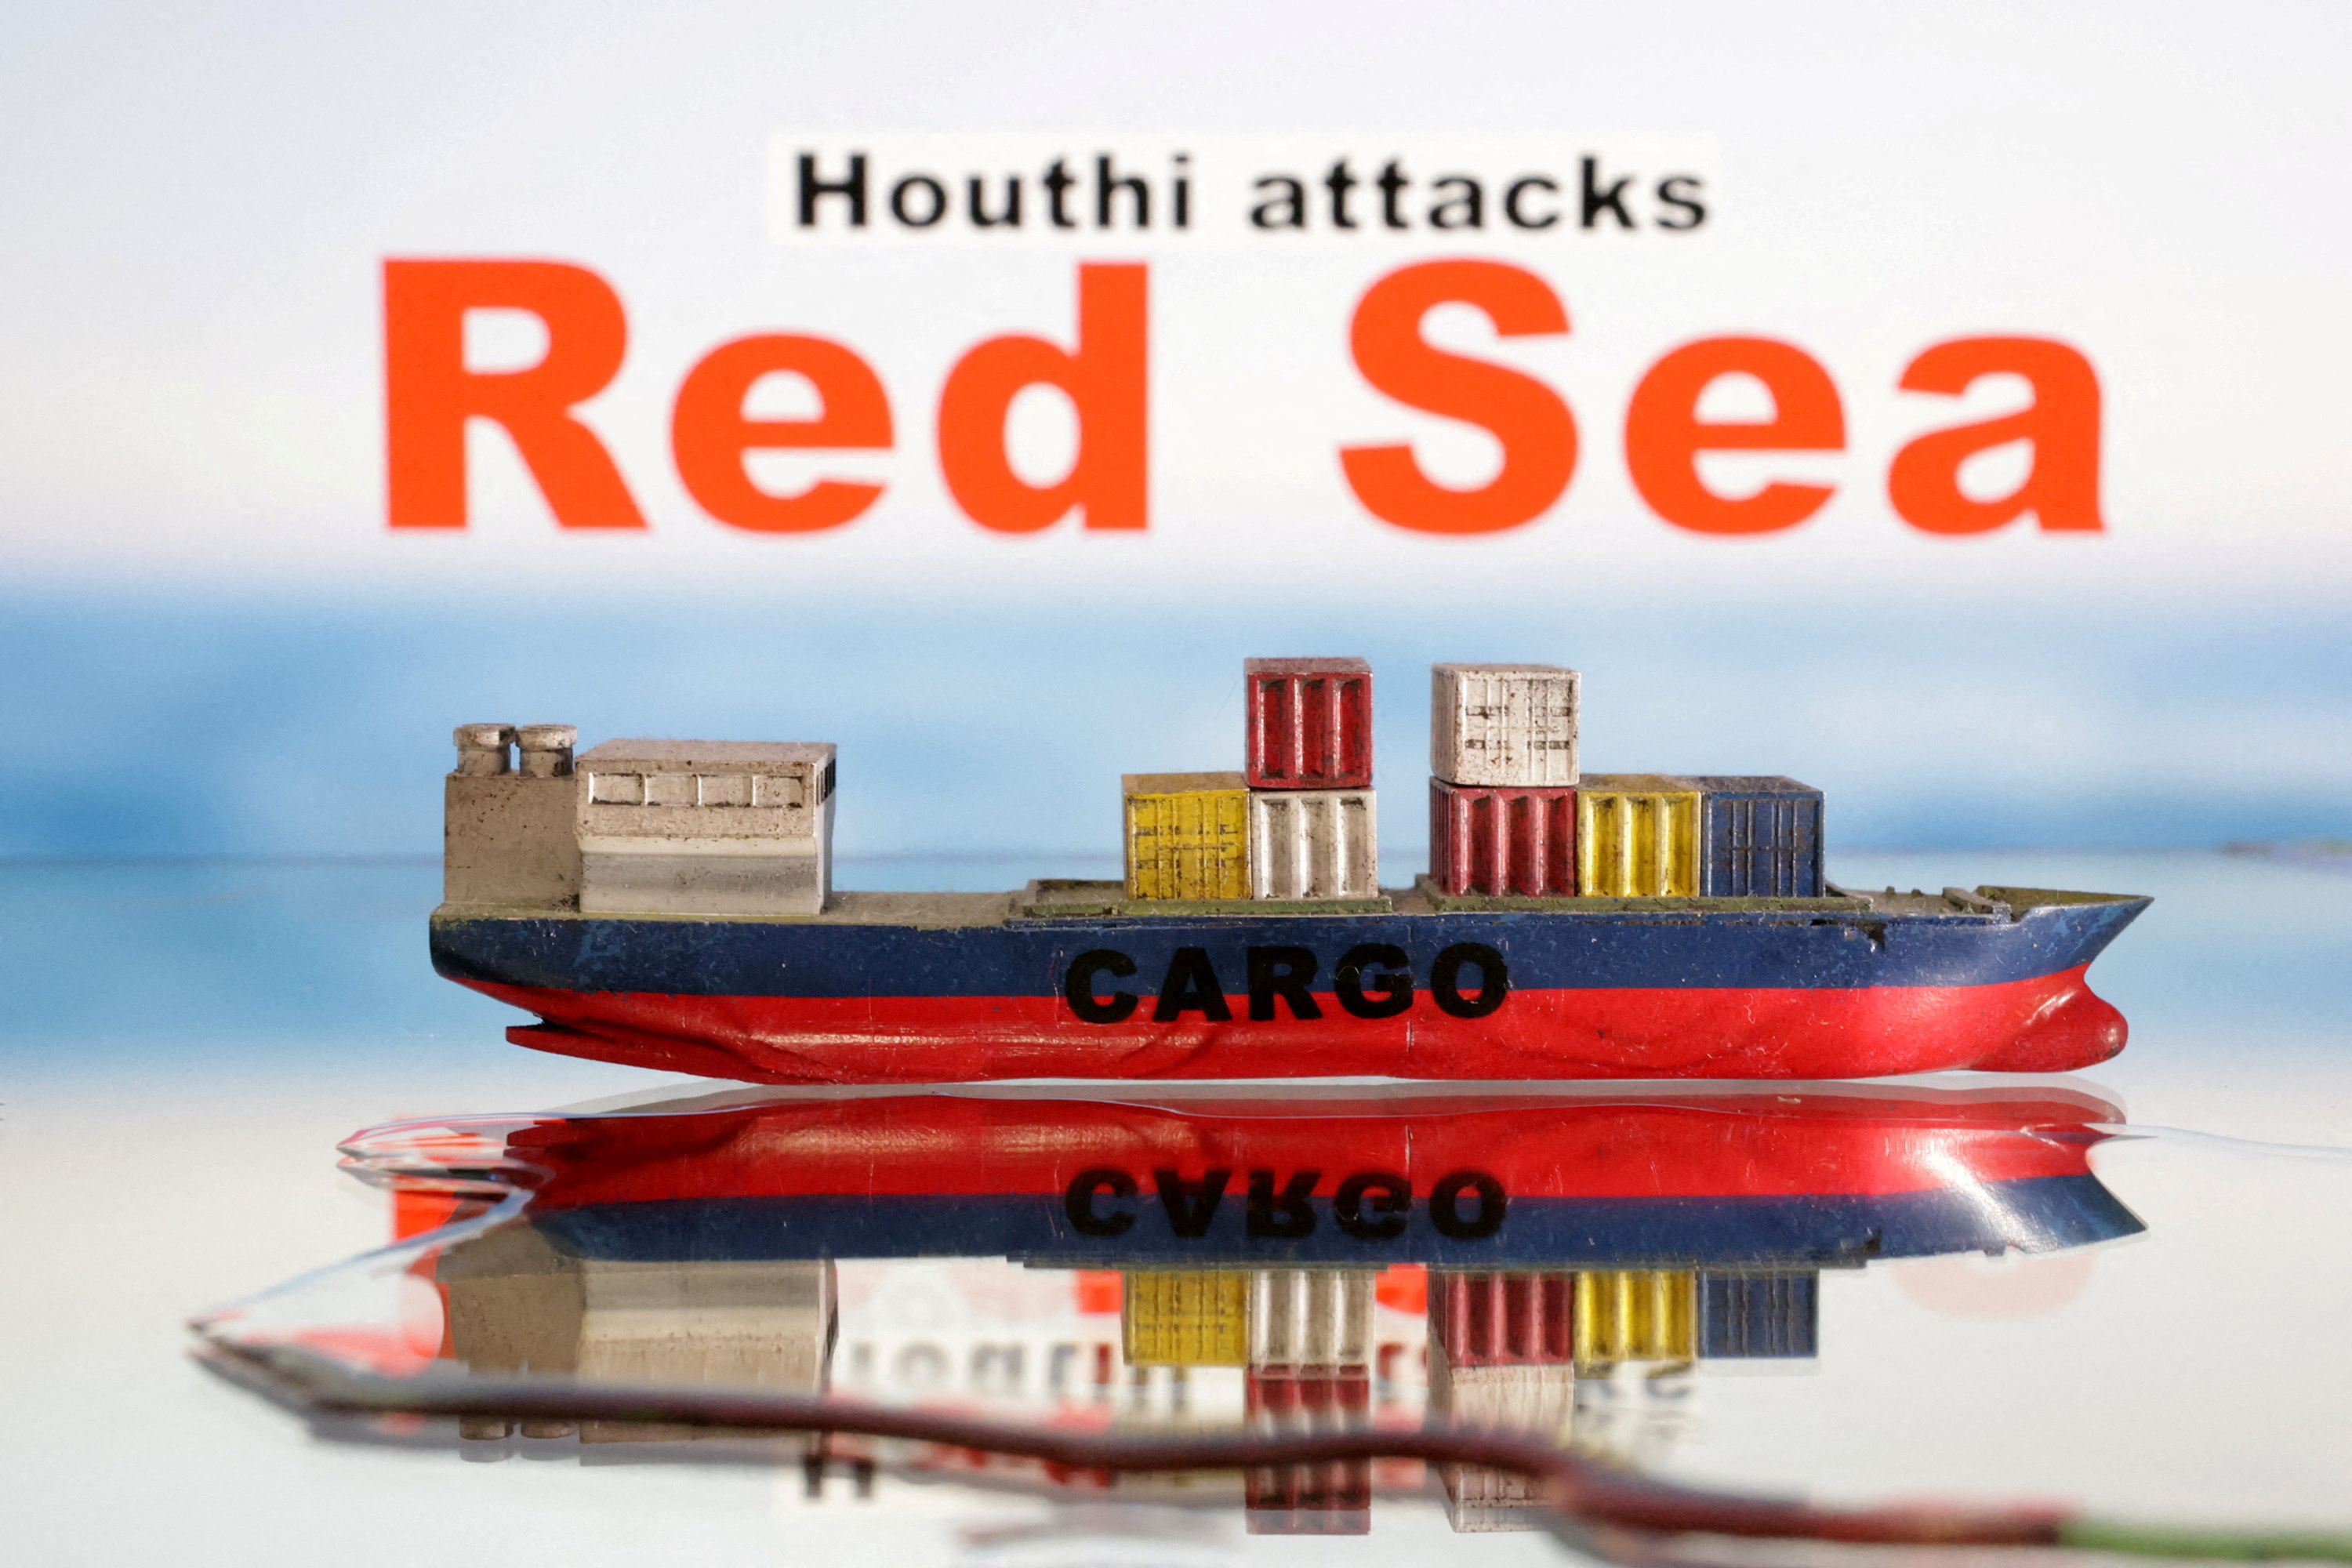 Illustration shows a cargo ship boat model and "Red Sea" and "Houthi attacks" words